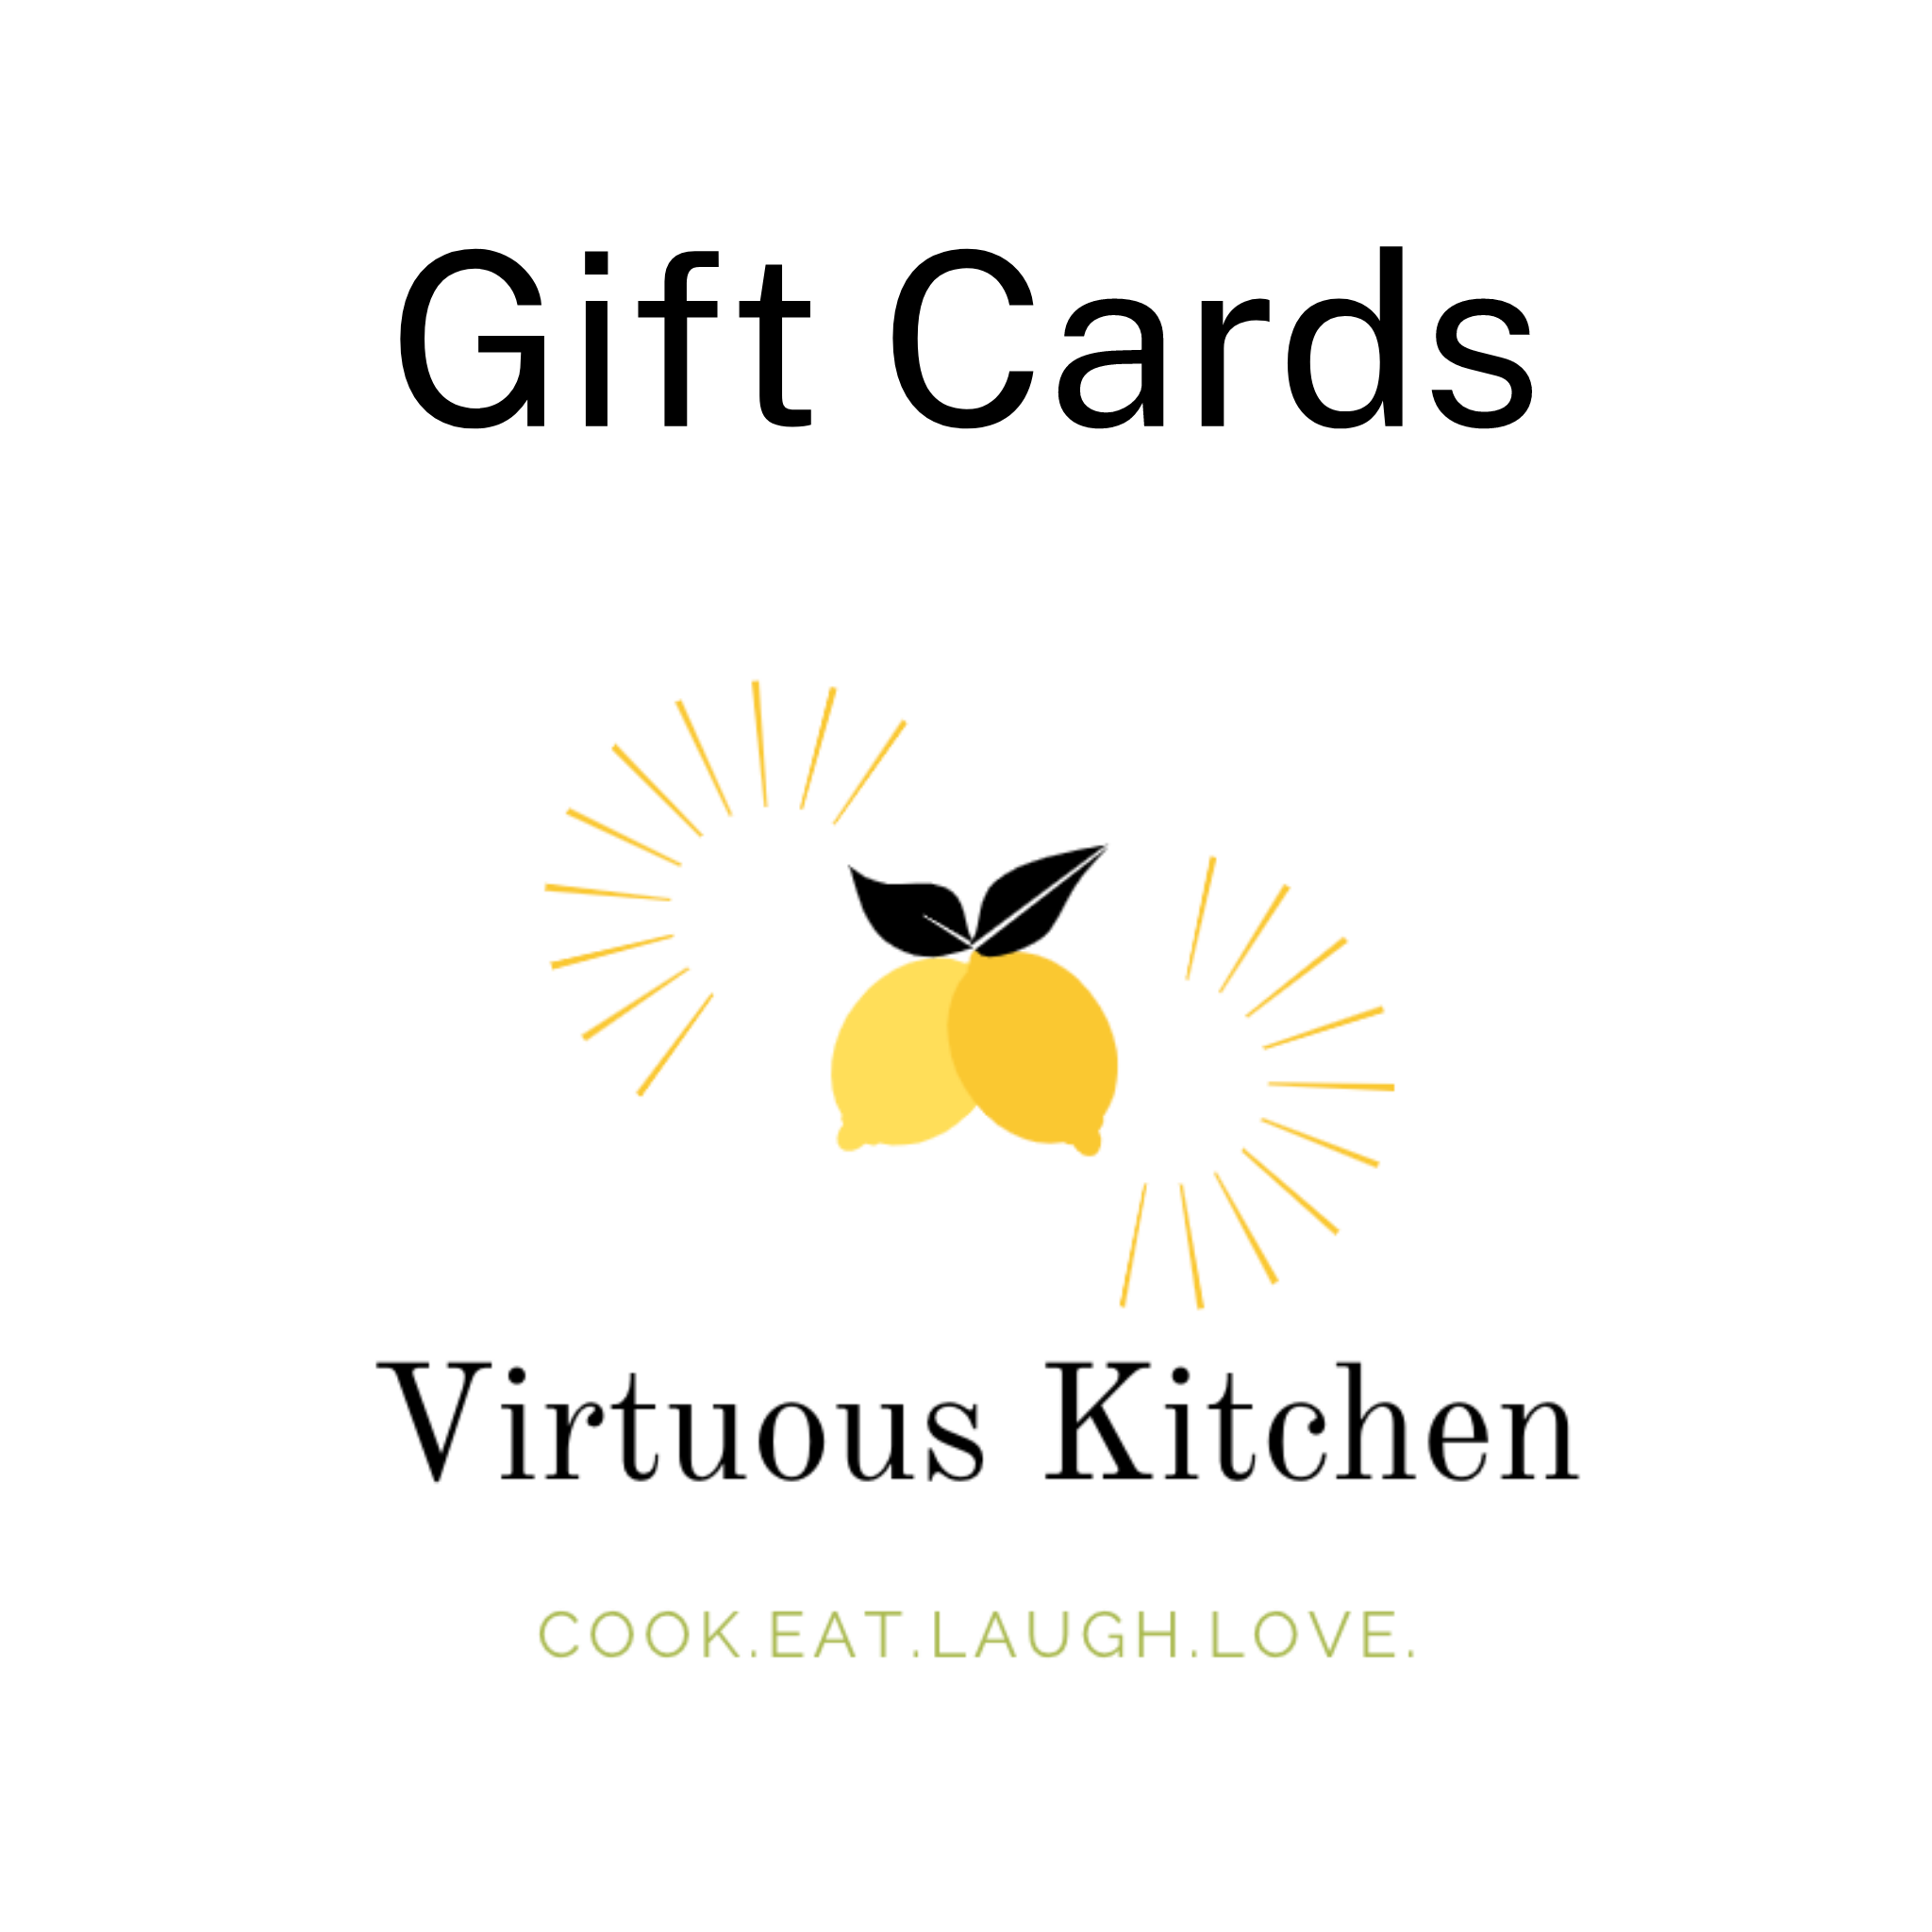 Virtuous Kitchen Gift Card